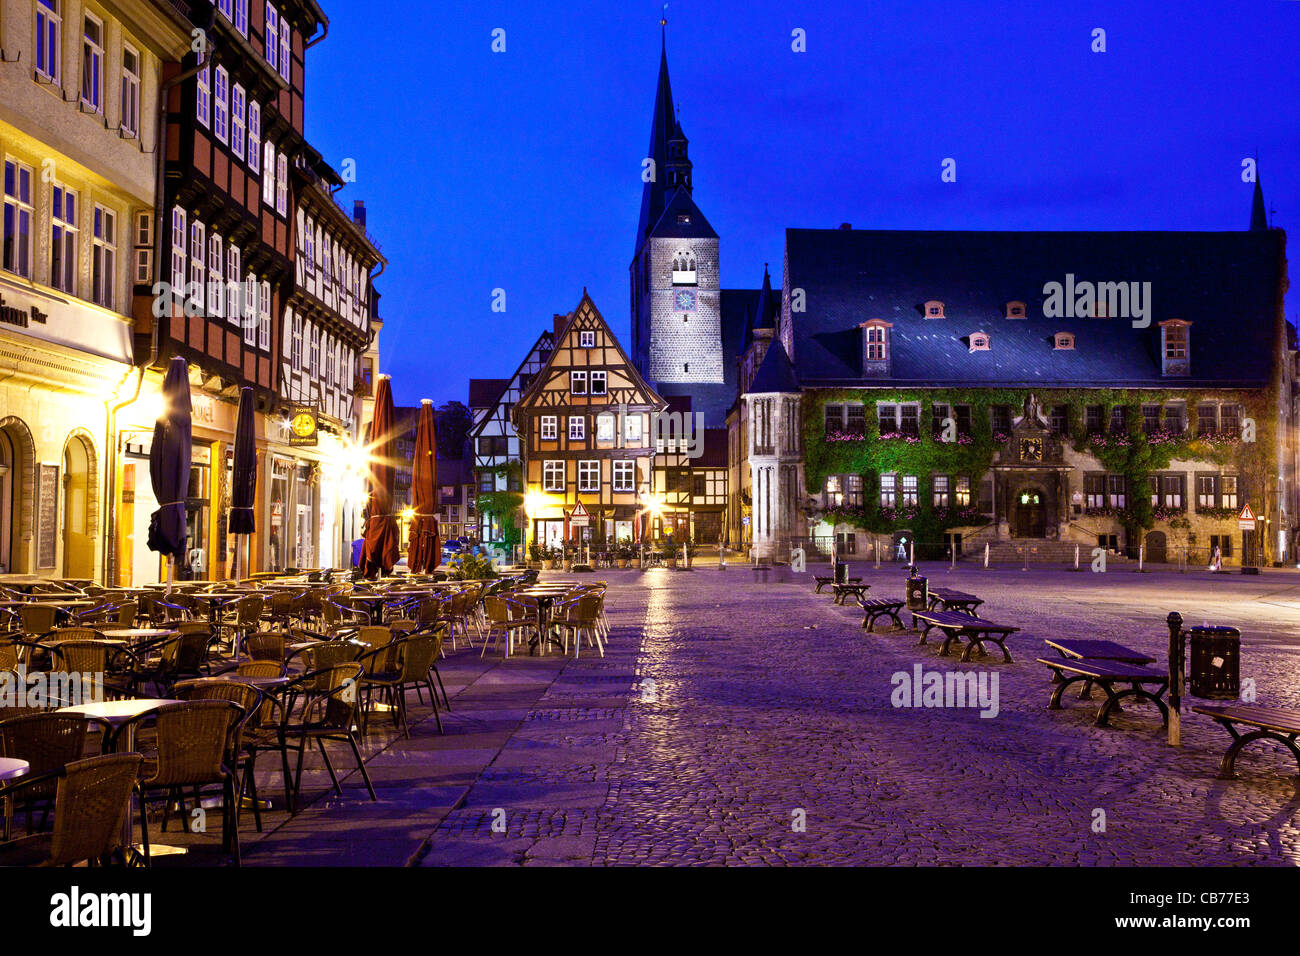 Twilight in the market place, Markt, with the Town Hall, Rathaus on right, and St. Benedikti Church, in Quedlinburg, Germany Stock Photo